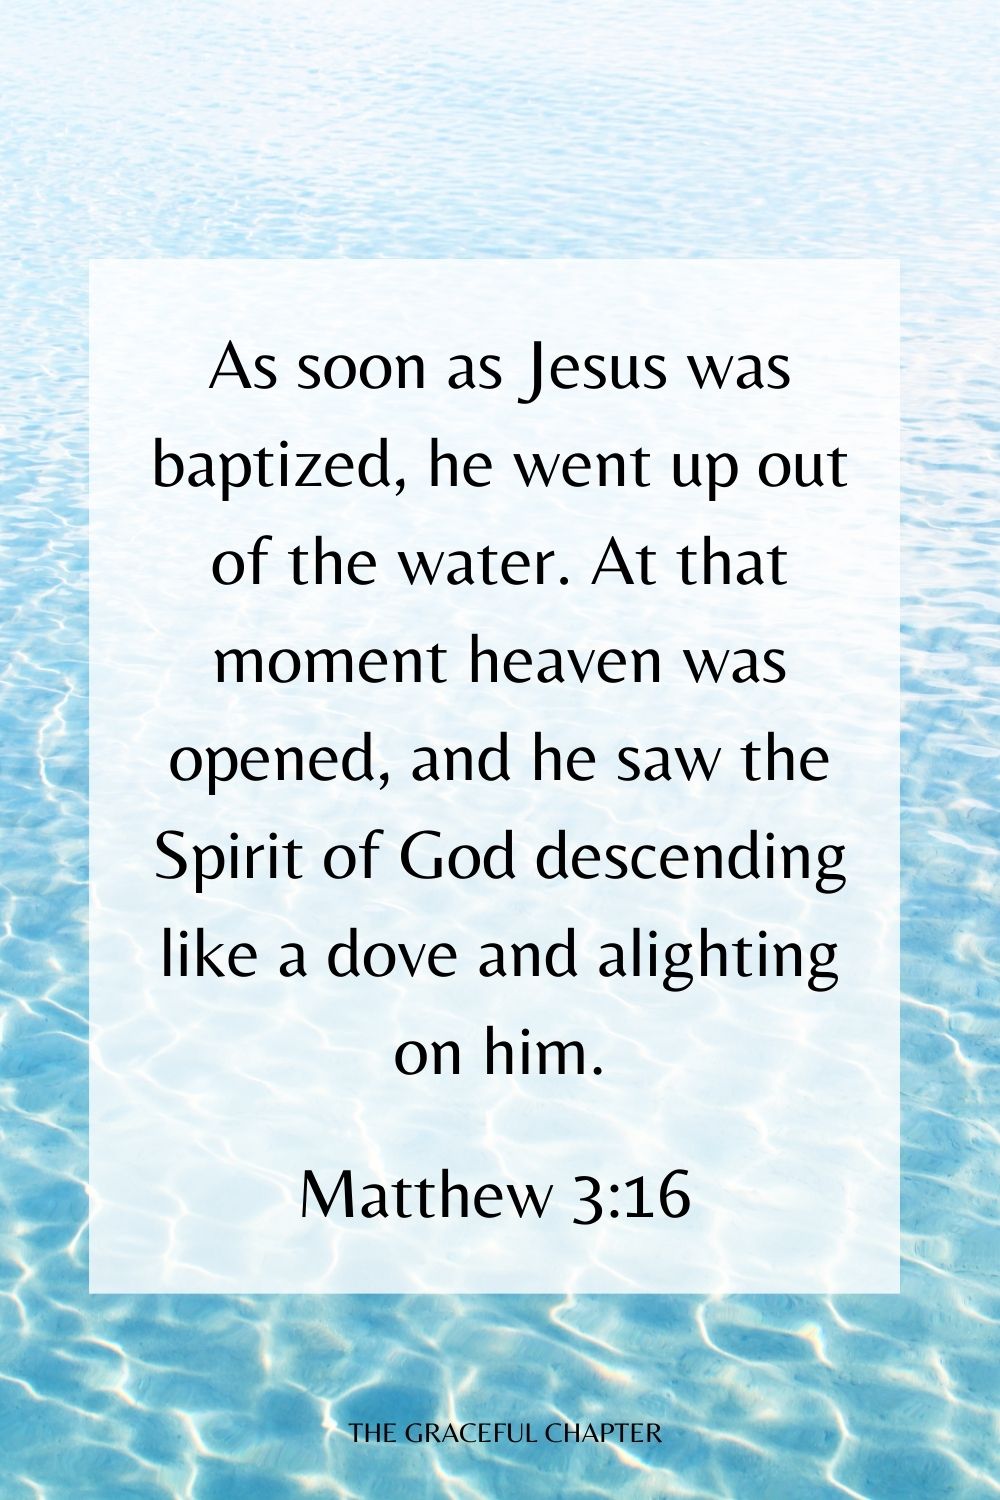 As soon as Jesus was baptized, he went up out of the water. At that moment heaven was opened, and he saw the Spirit of God descending like a dove and alighting on him. Matthew 3:16